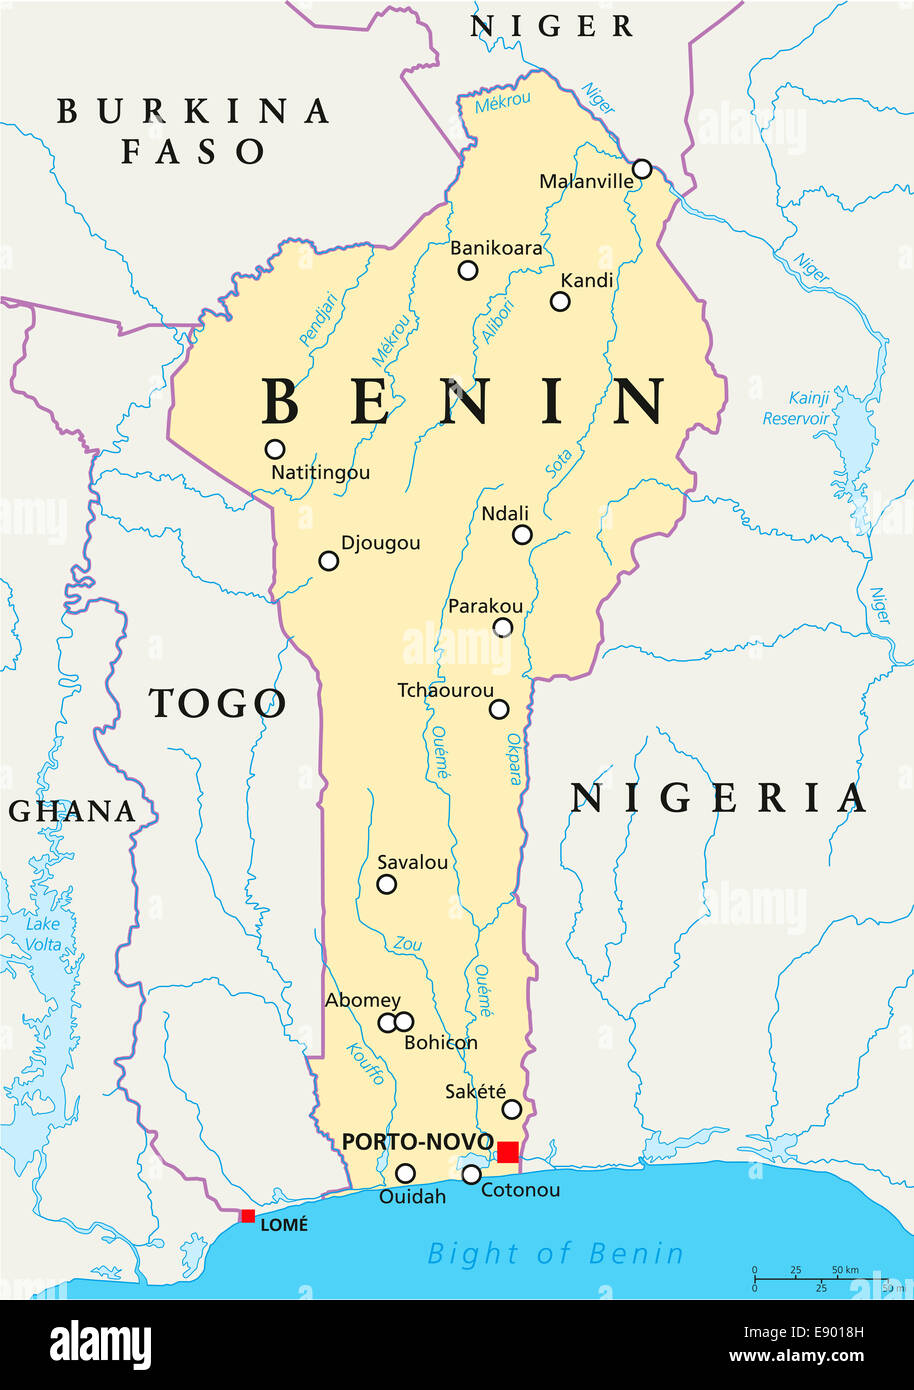 Benin Political Map with capital Porto-Novo, national borders, most important cities, rivers and lakes. English labeling. Stock Photo